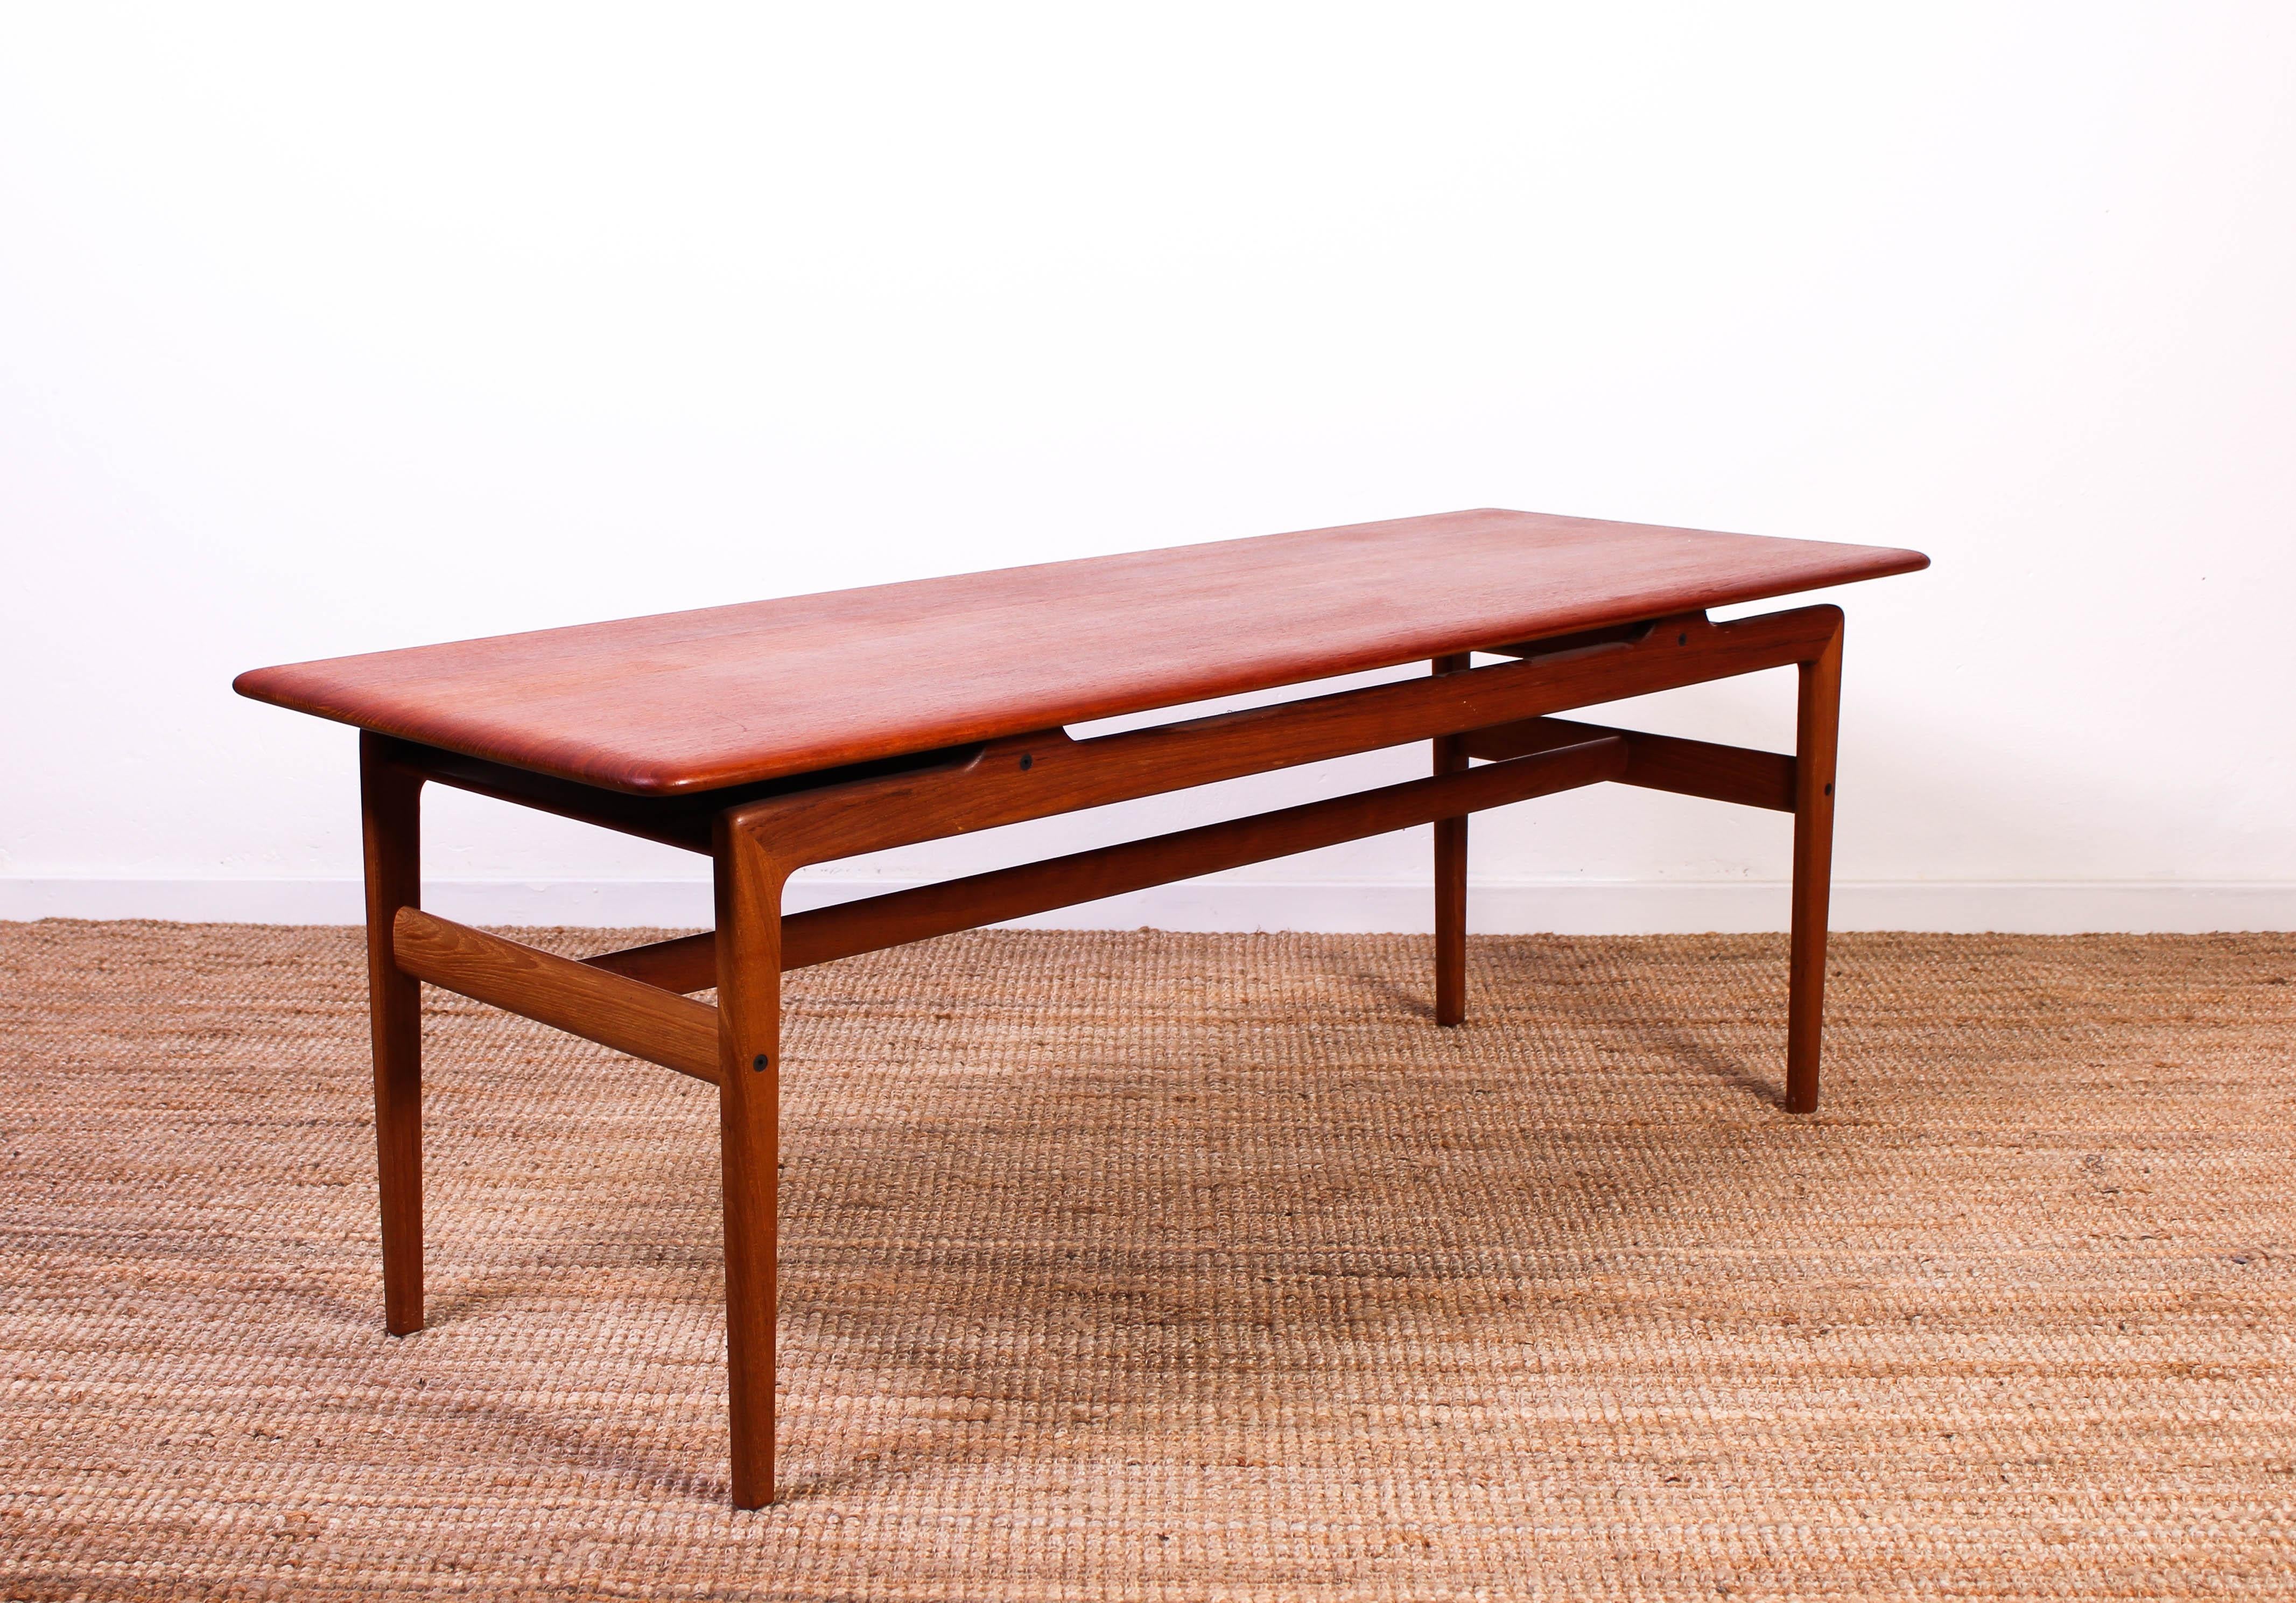 Midcentury Danish coffee table made of solid teak. Designed by Peter Hvidt and Orla Mølgaard Nielsen in the 1950s. 

Very good vintage condition with only small signs of usage.